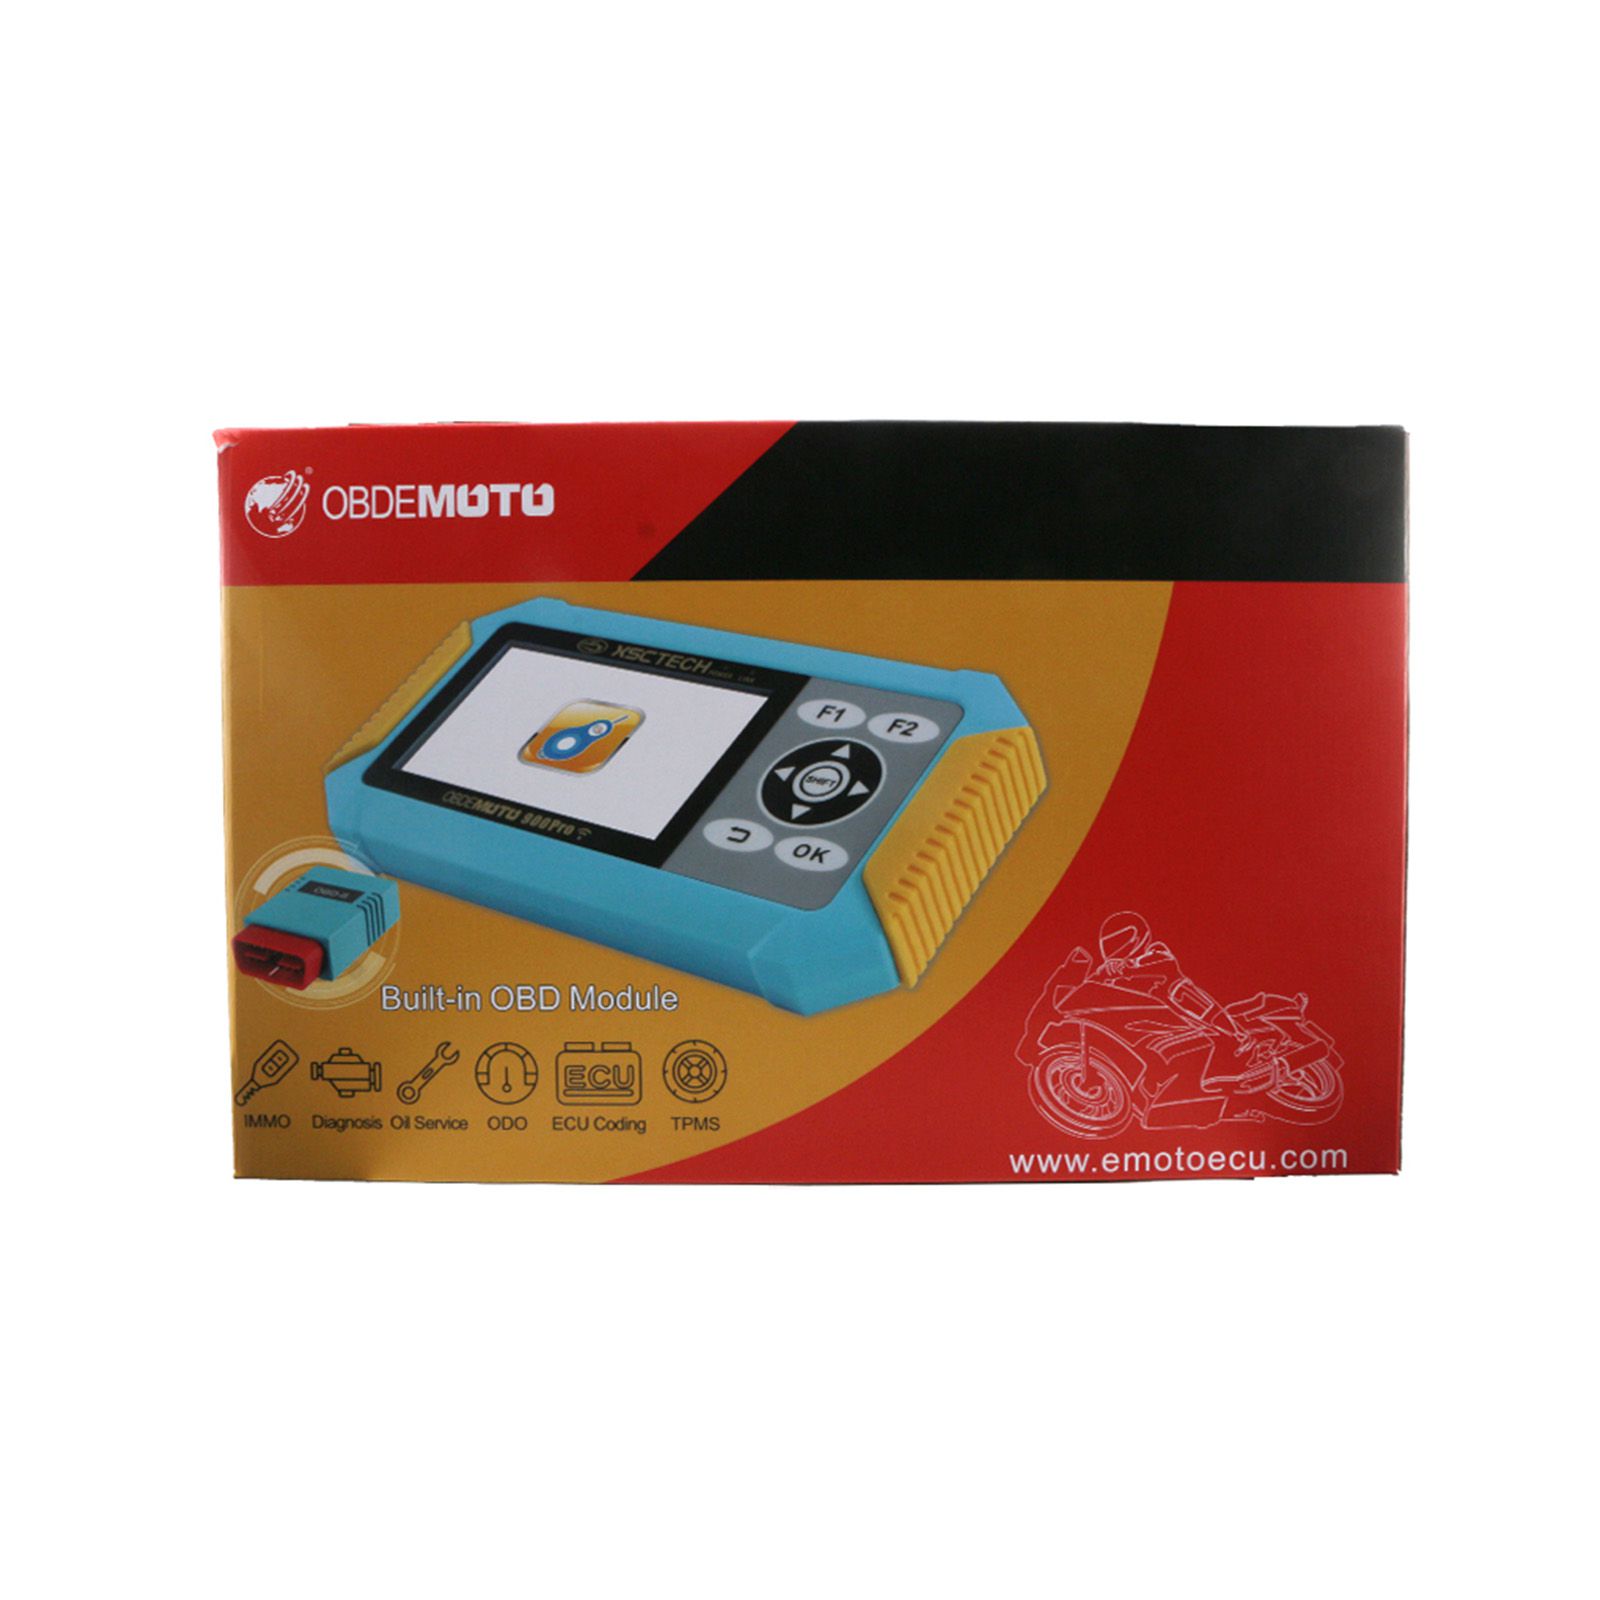 OBDEMOTO 900PRO Key Programmer 3-in-1 Muti-functional Support Motorcycle Diagnosis + Key Matching + ODO Mileage Adjustment